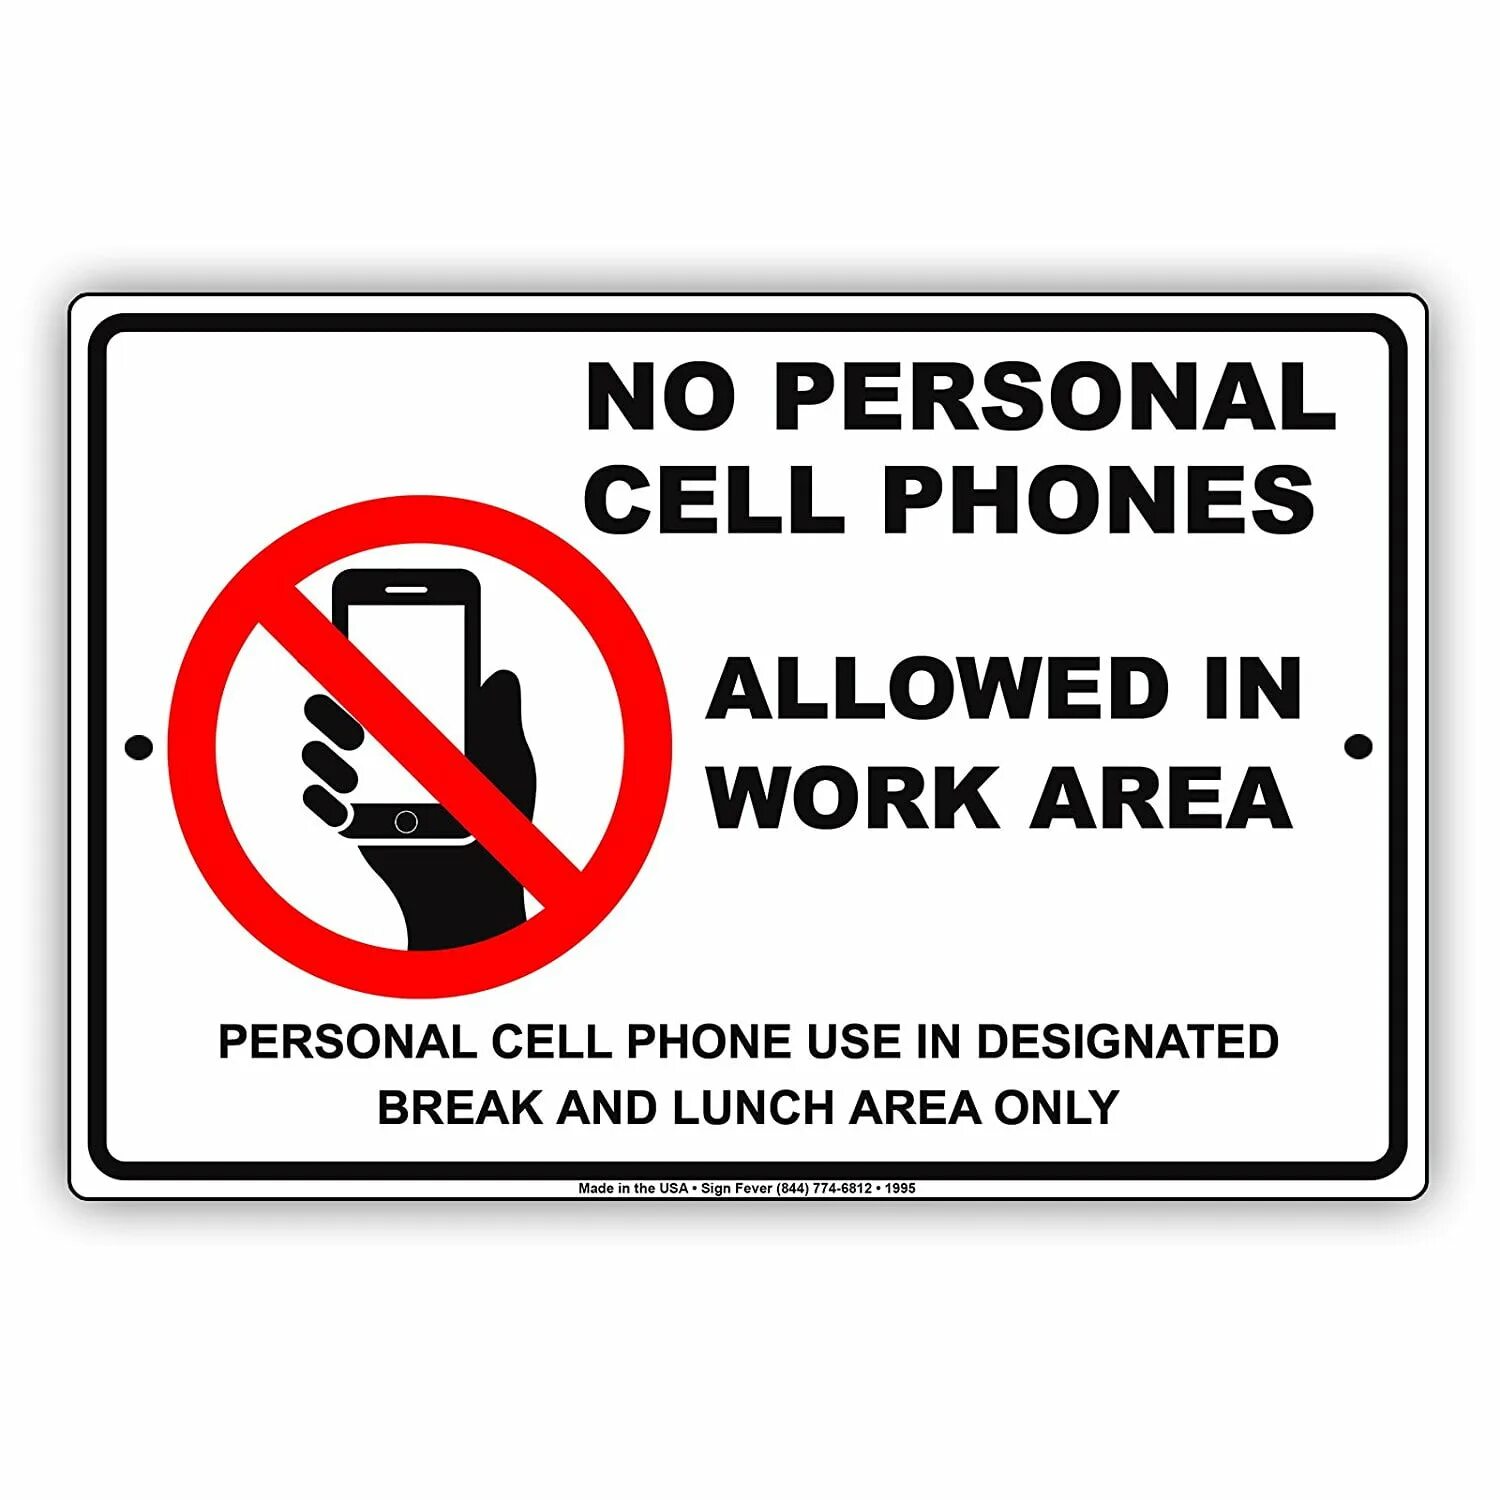 Allowed to work in the. No Phone sign. No Cell Phone use. No cellphone use sign. Cell Phones not allowed.